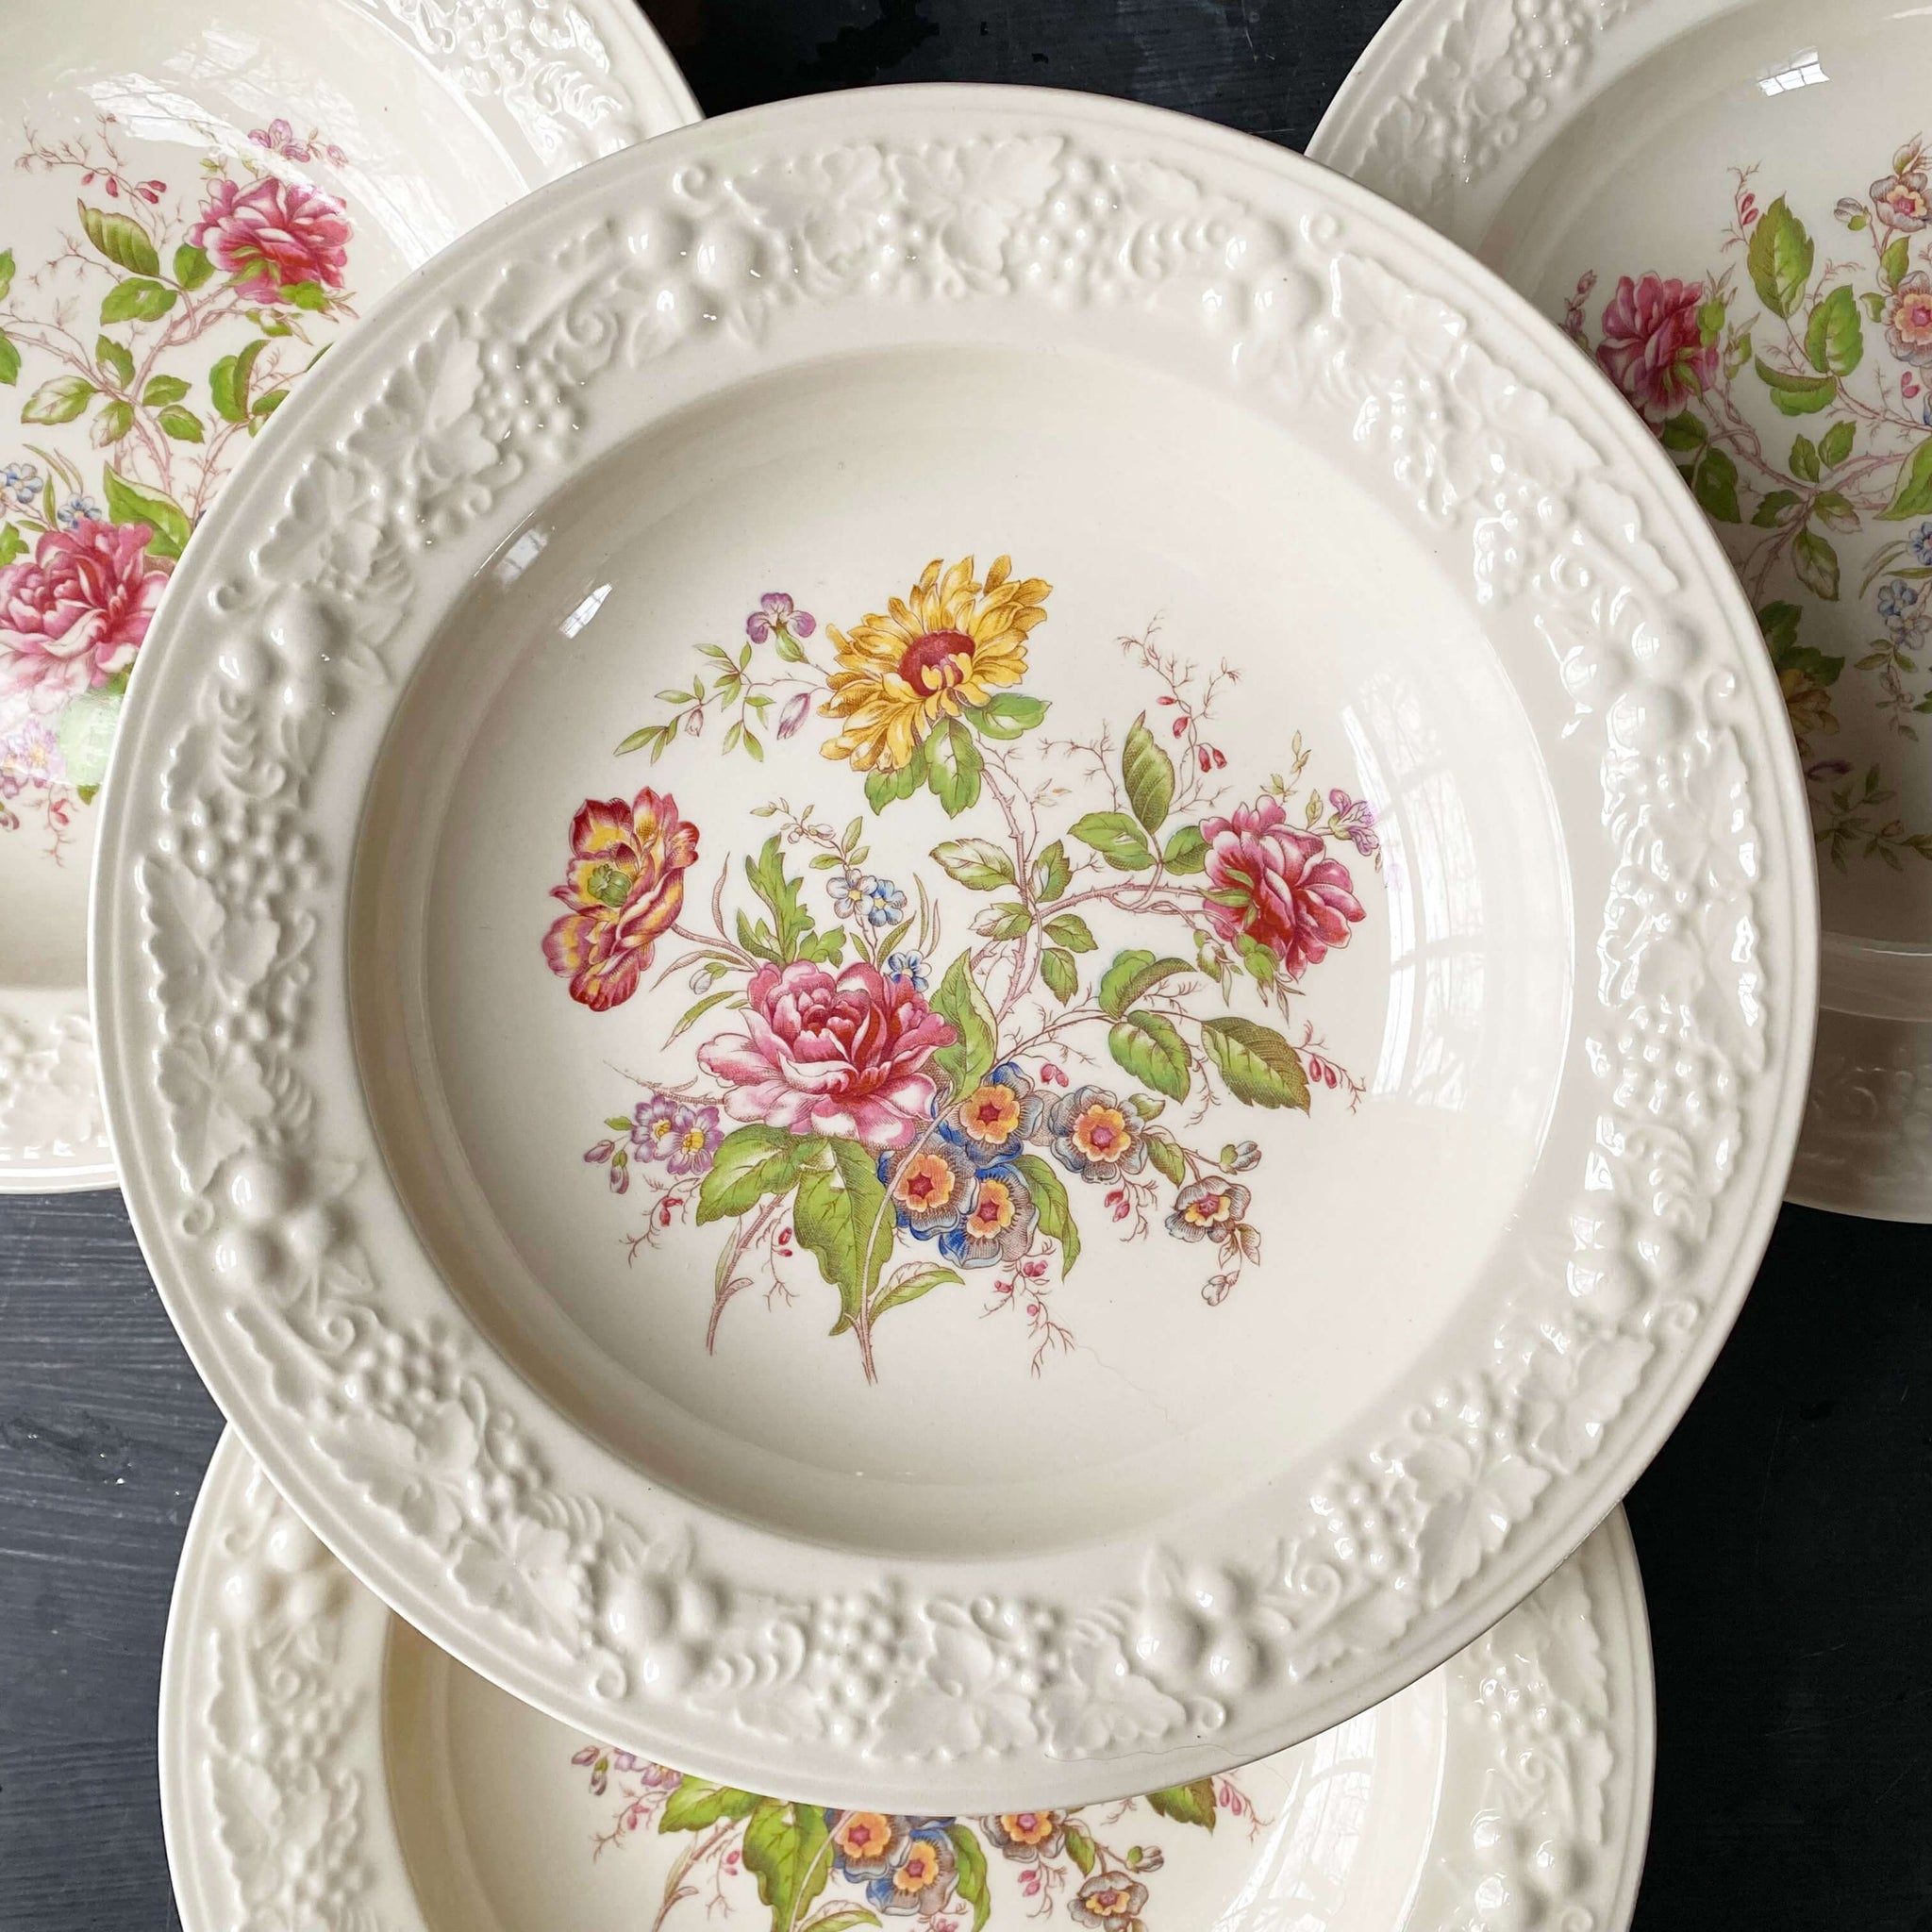 Vintage 1940s Homer Laughlin Eggshell Soup Bowls with Pink & Yellow Florals - Set of 4 circa 1947